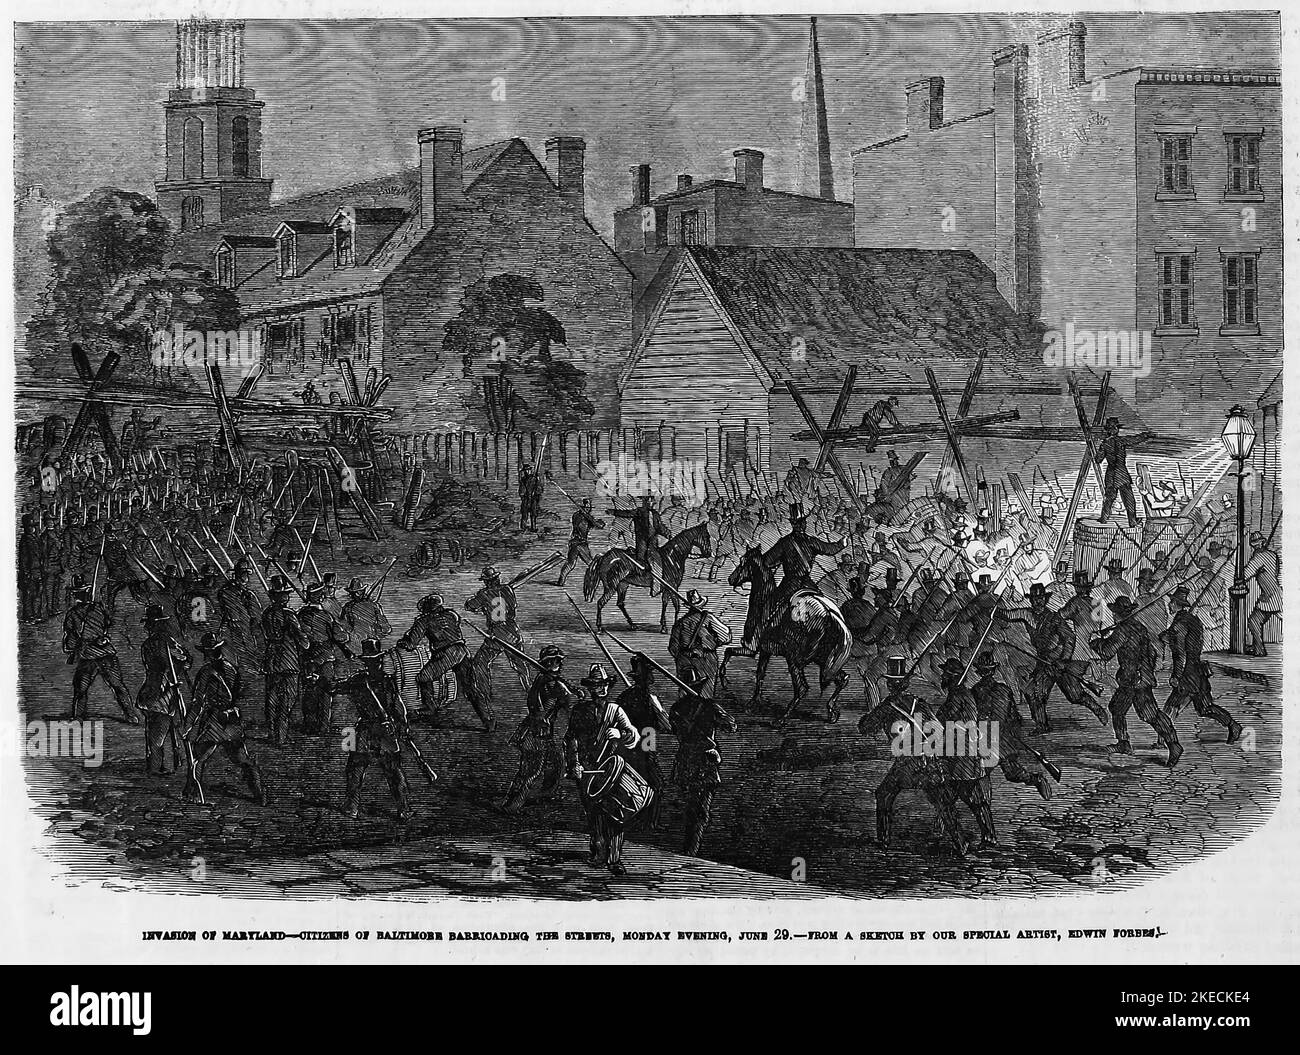 Invasion of Maryland - Citizens of Baltimore barricading the streets, Monday evening, June 29th, 1863. Gettysburg Campaign. 19th century American Civil War illustration from Frank Leslie's Illustrated Newspaper Stock Photo